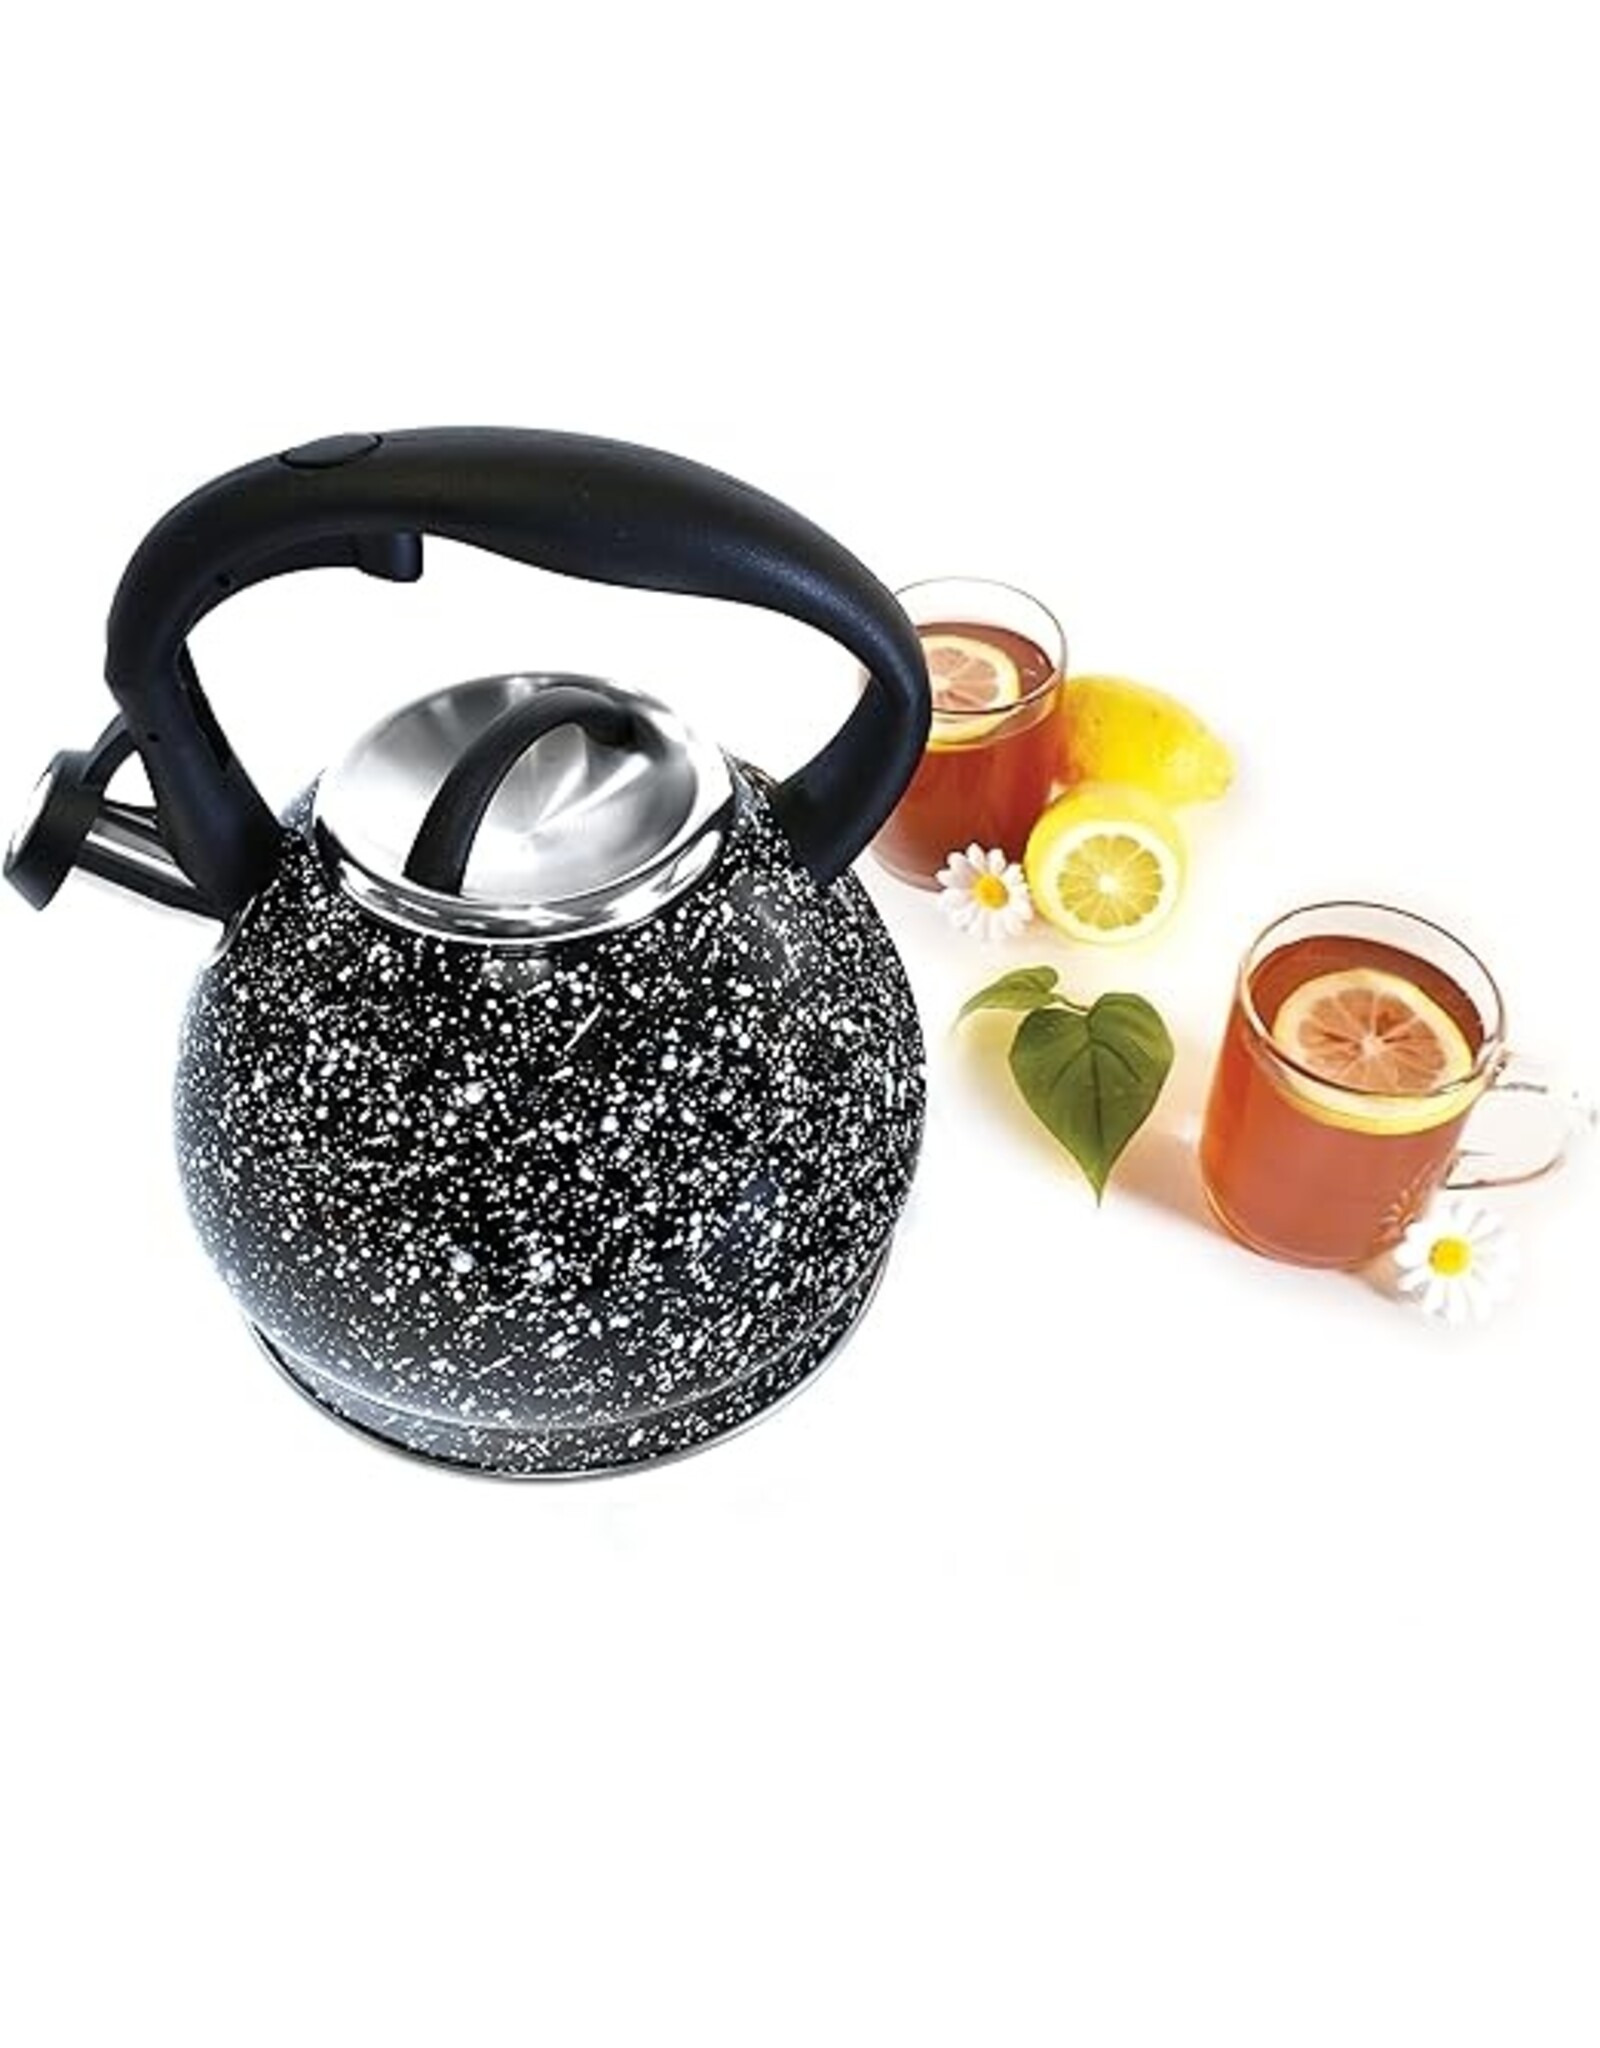 Black with White Speckles Tea Kettle